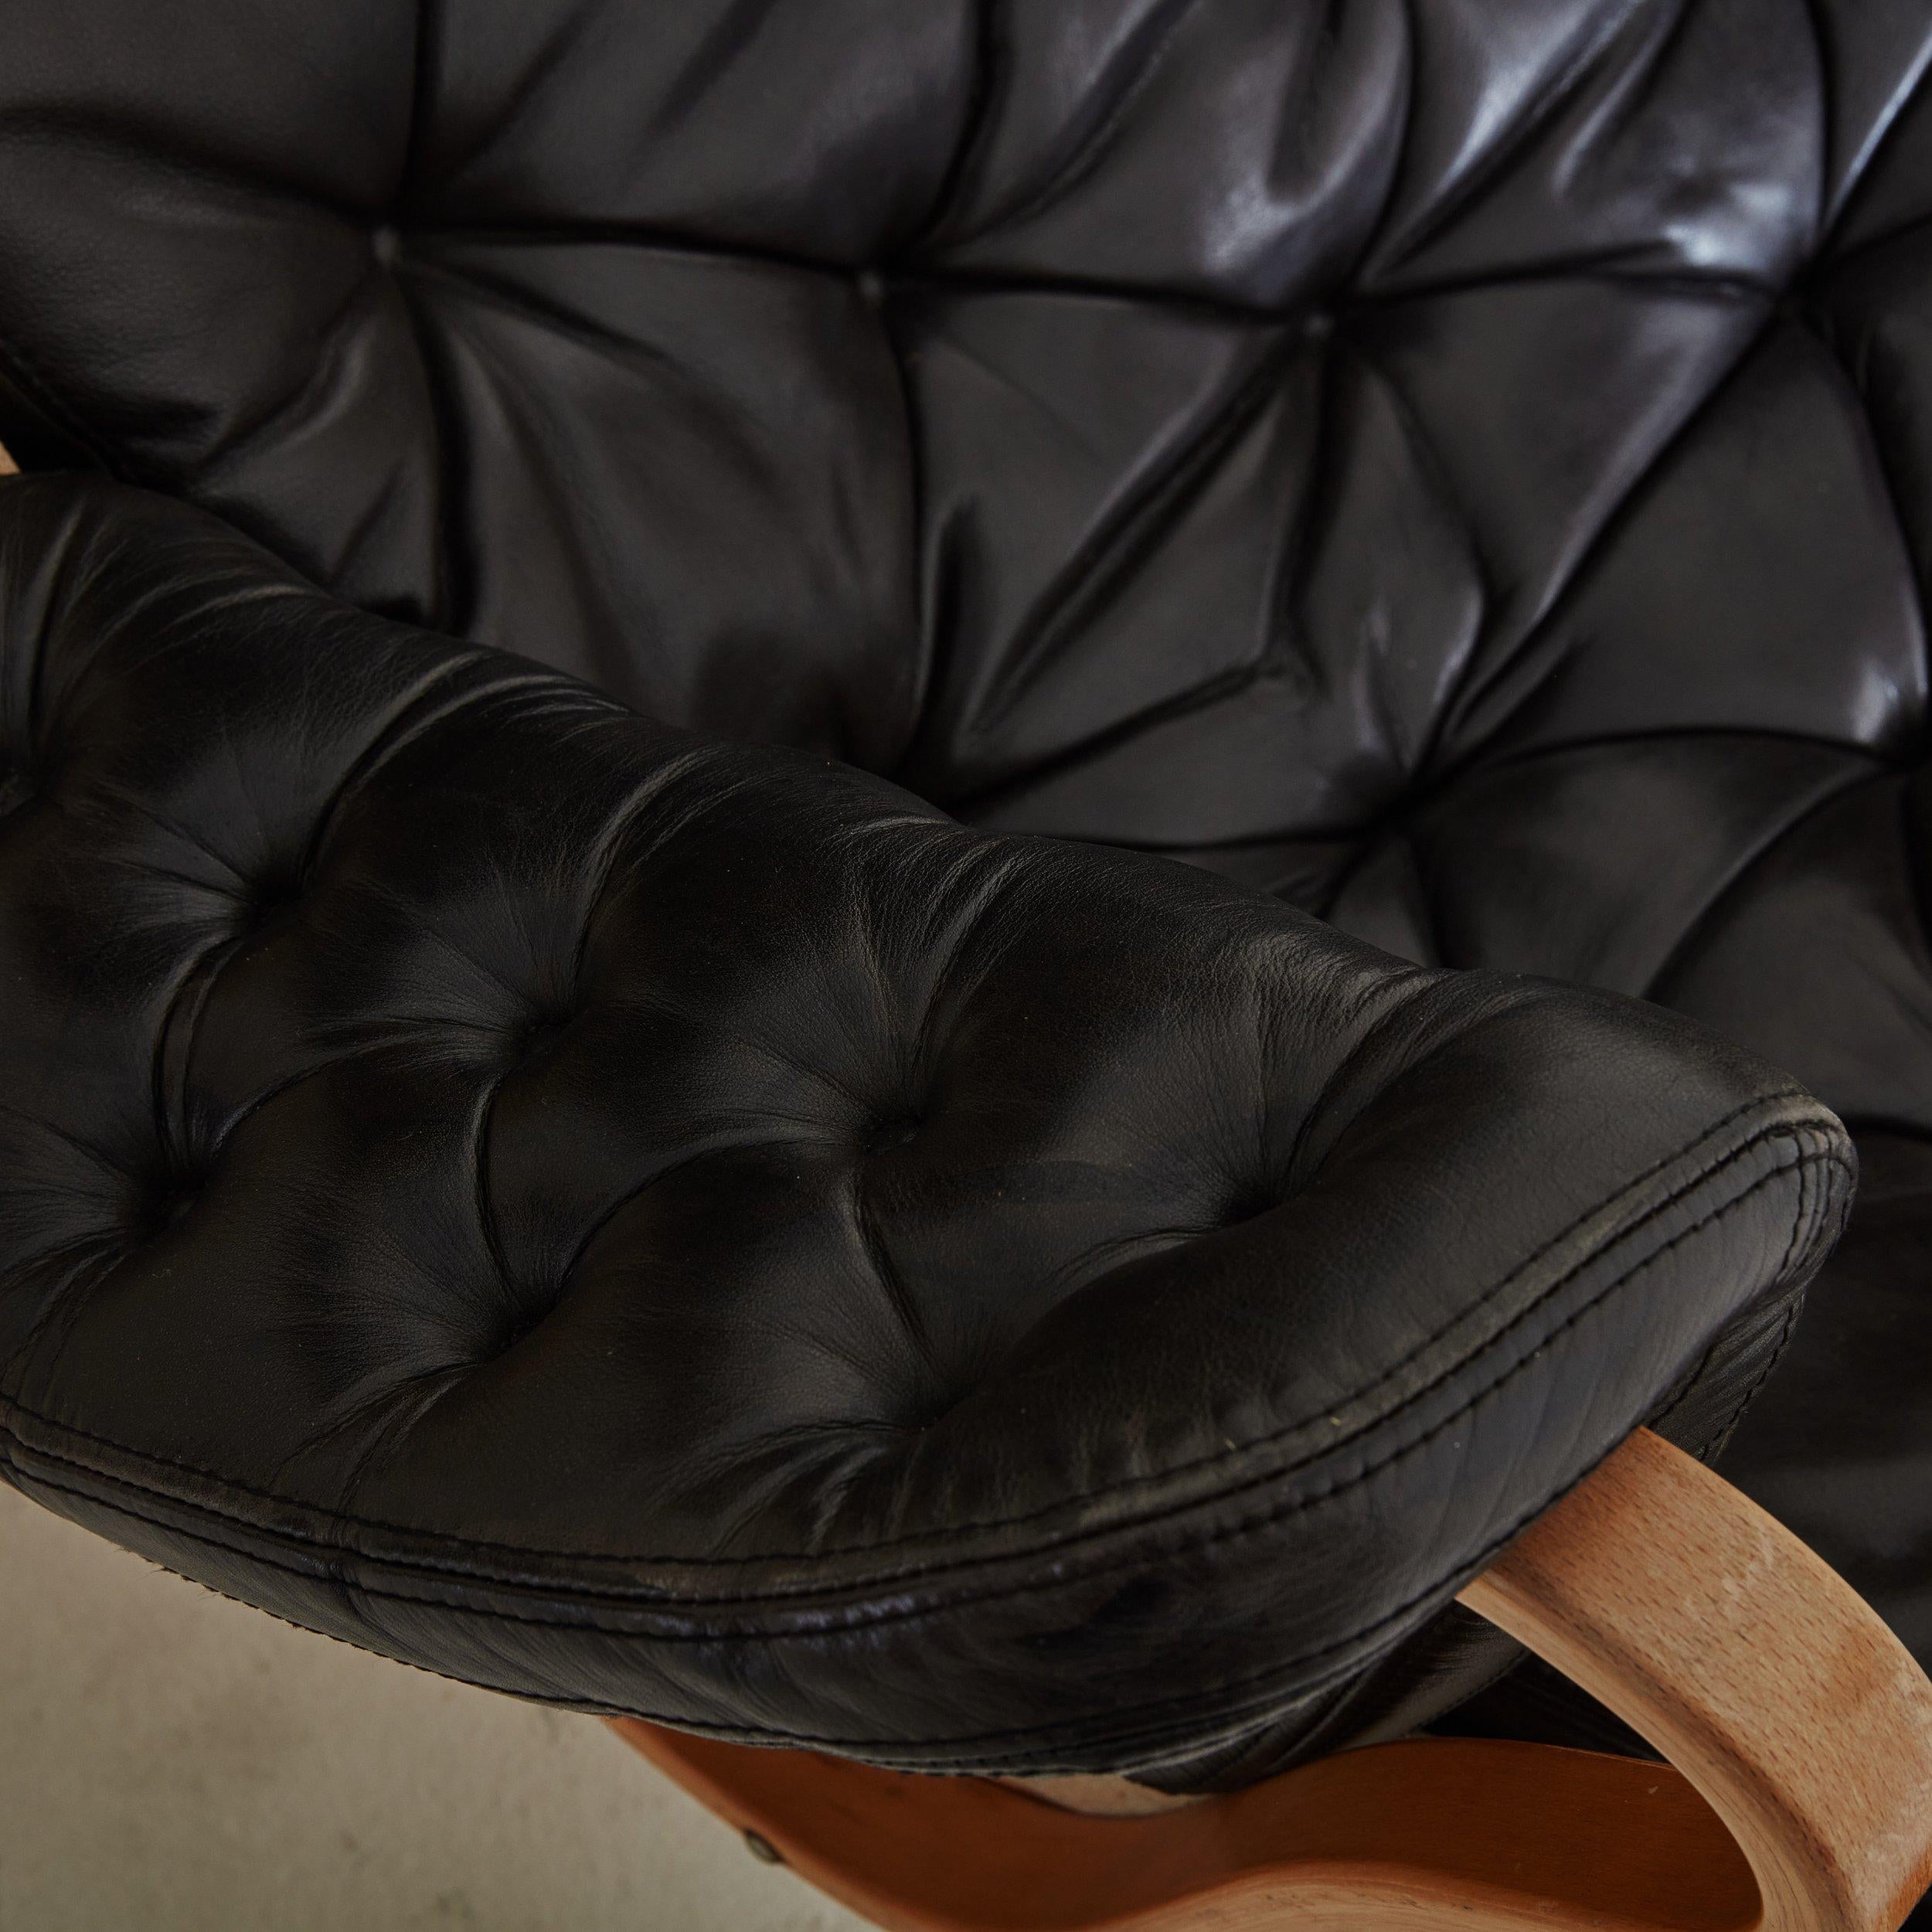 Black Leather Tufted 'Pernilla' Armchair by Bruno Mathsson for DUX, Sweden 1960s For Sale 2